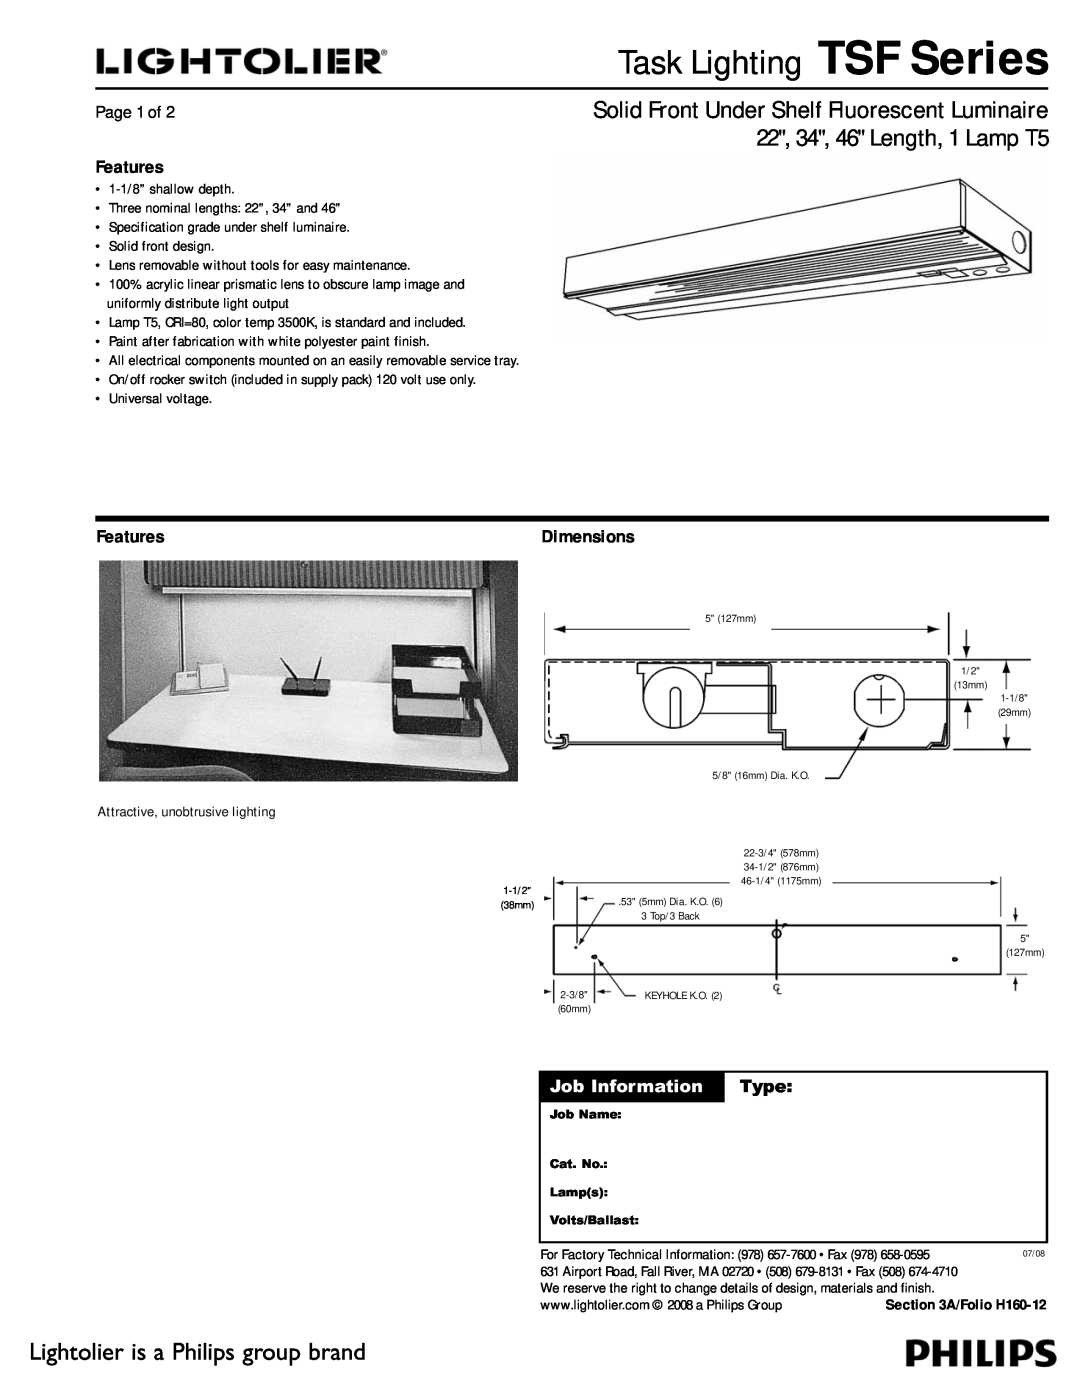 Lightolier dimensions Task Lighting TSF Series, Lightolier is a Philips group brand, Features, Page 1 of, Type 